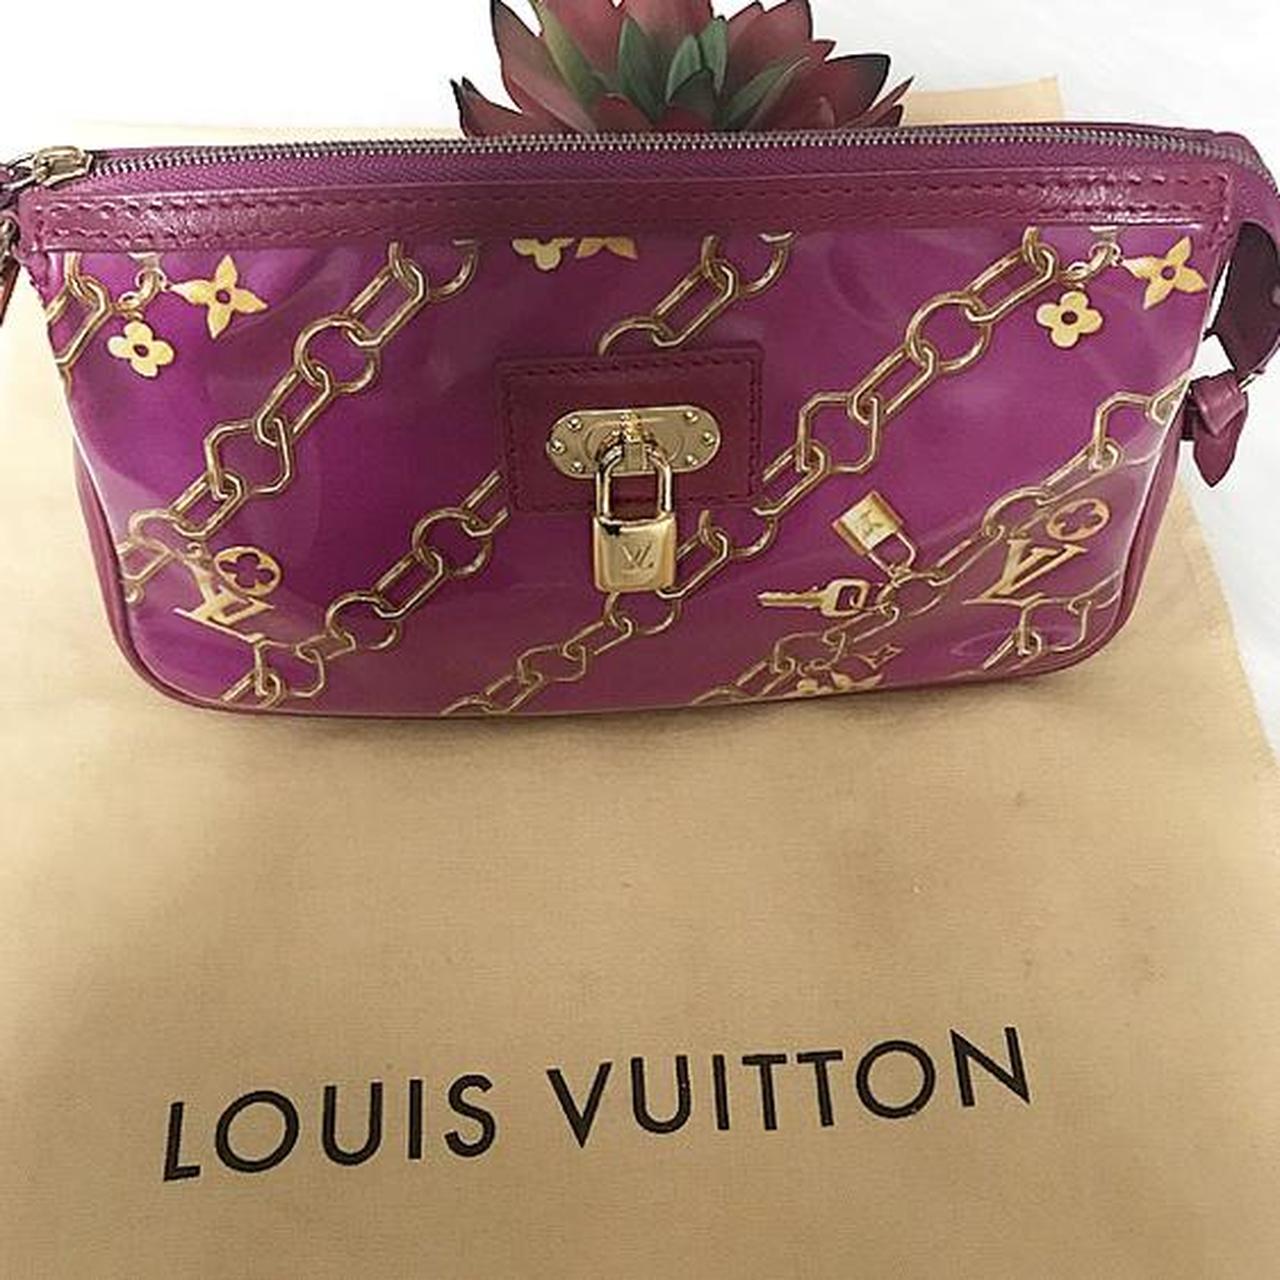 pink louis vuitton bag with gold chain